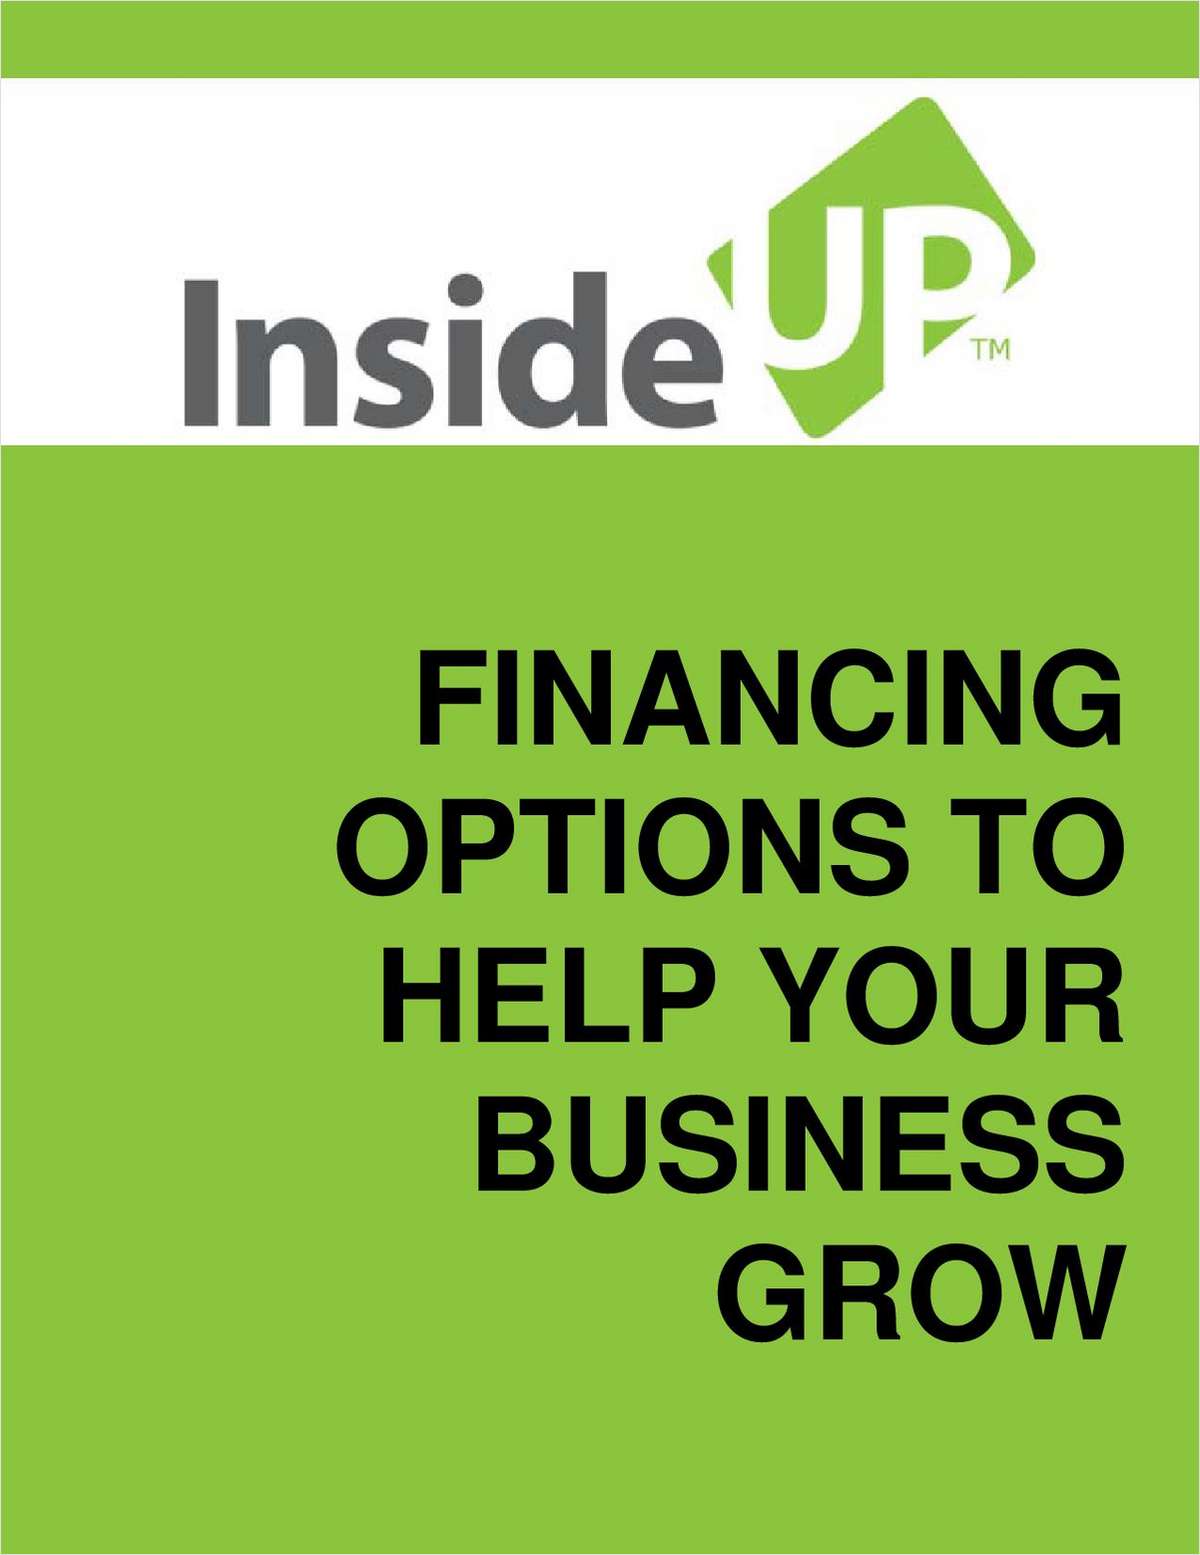 Understanding Financing Options That Can Help Your Business Grow